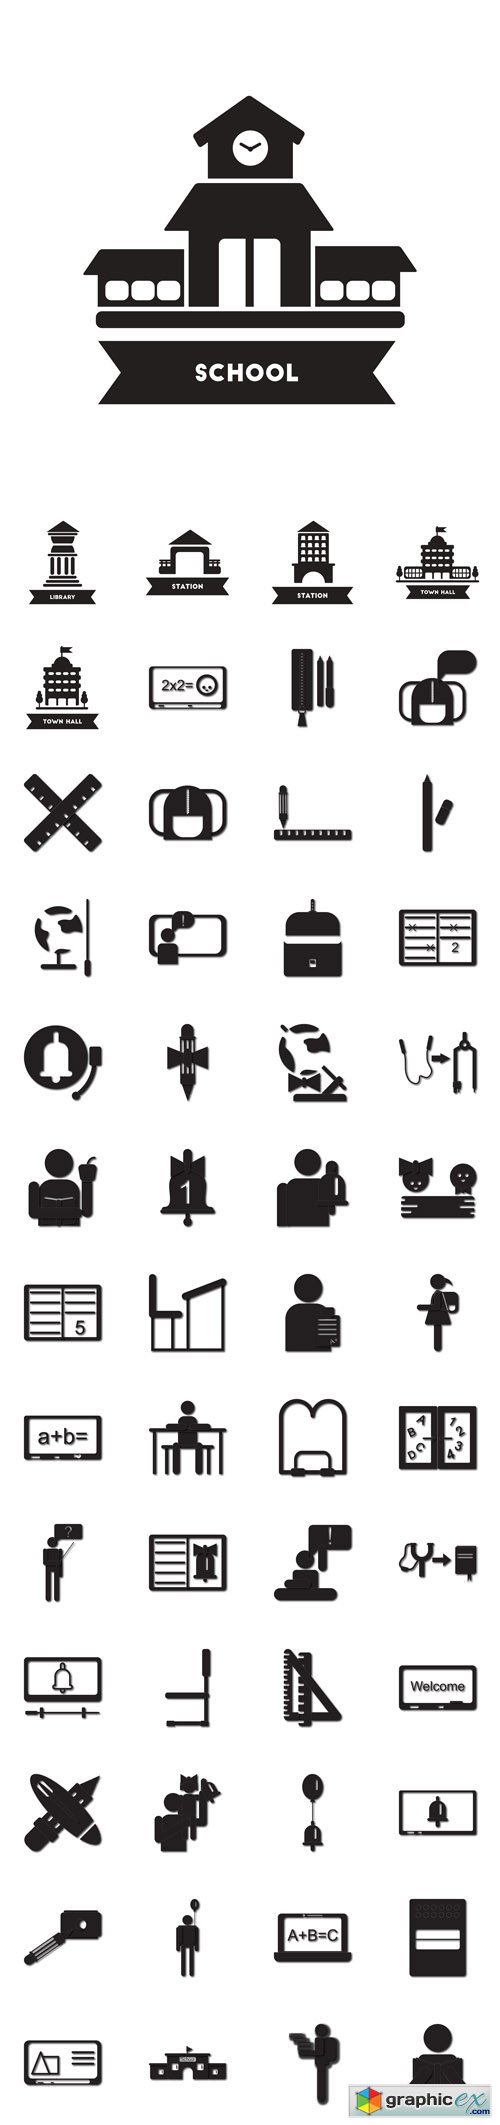 Back to School and Education flat icon in black and white style